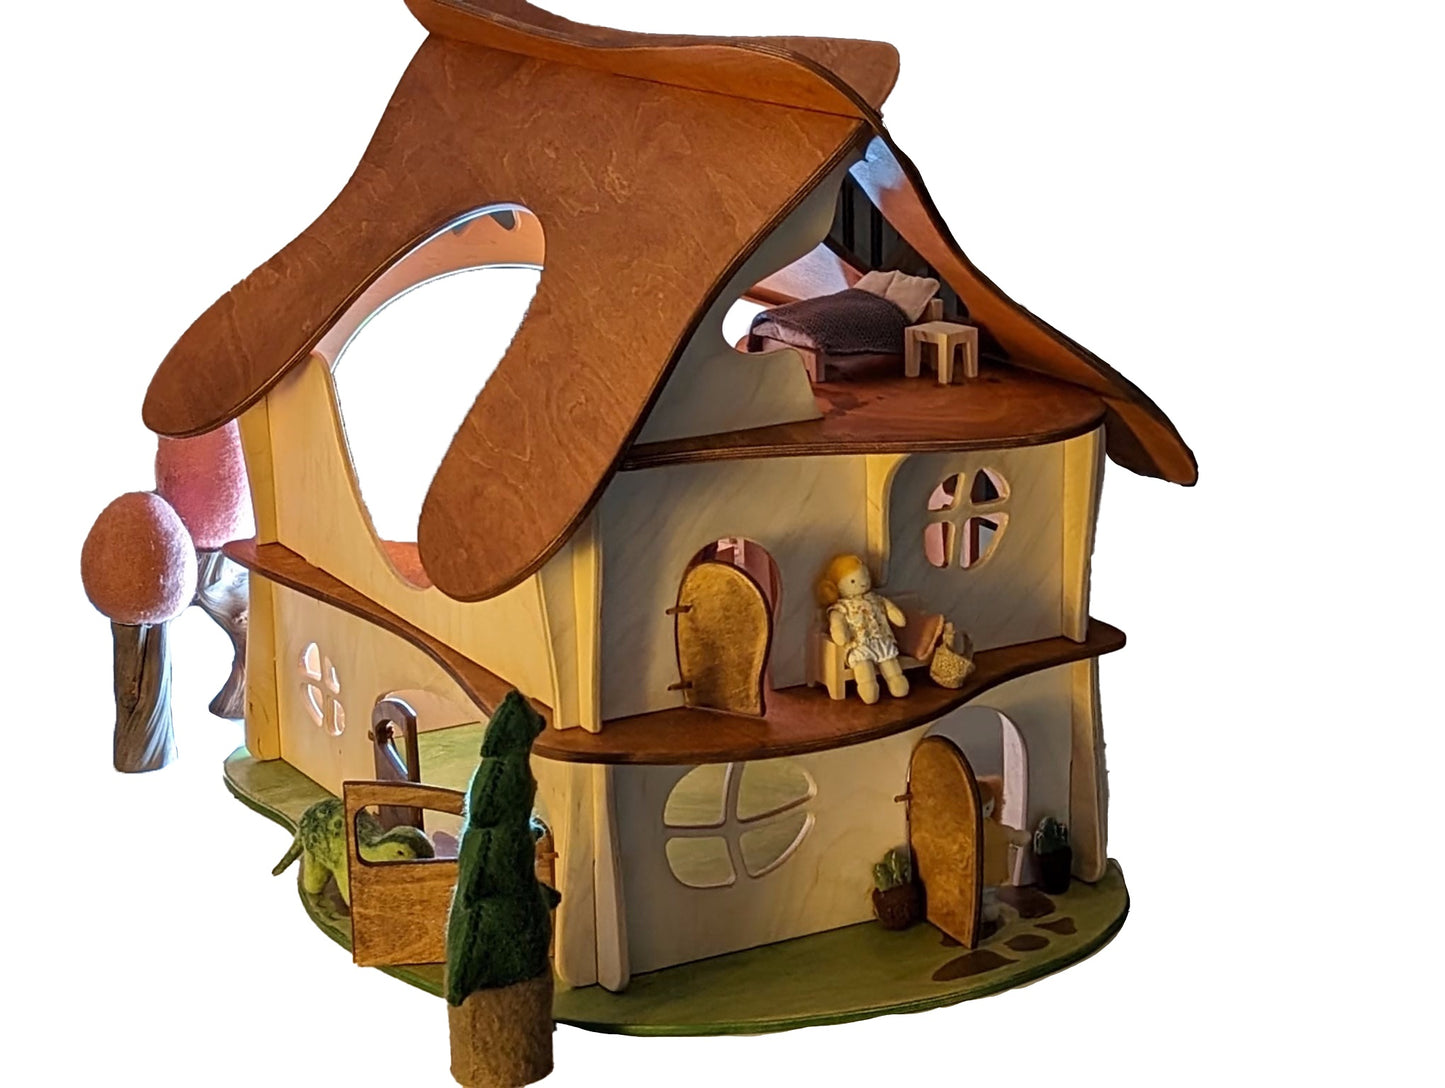 Montessori Toy Wooden Dollhouse Large Size by Twig Studio - Perfect for Imaginative Play!